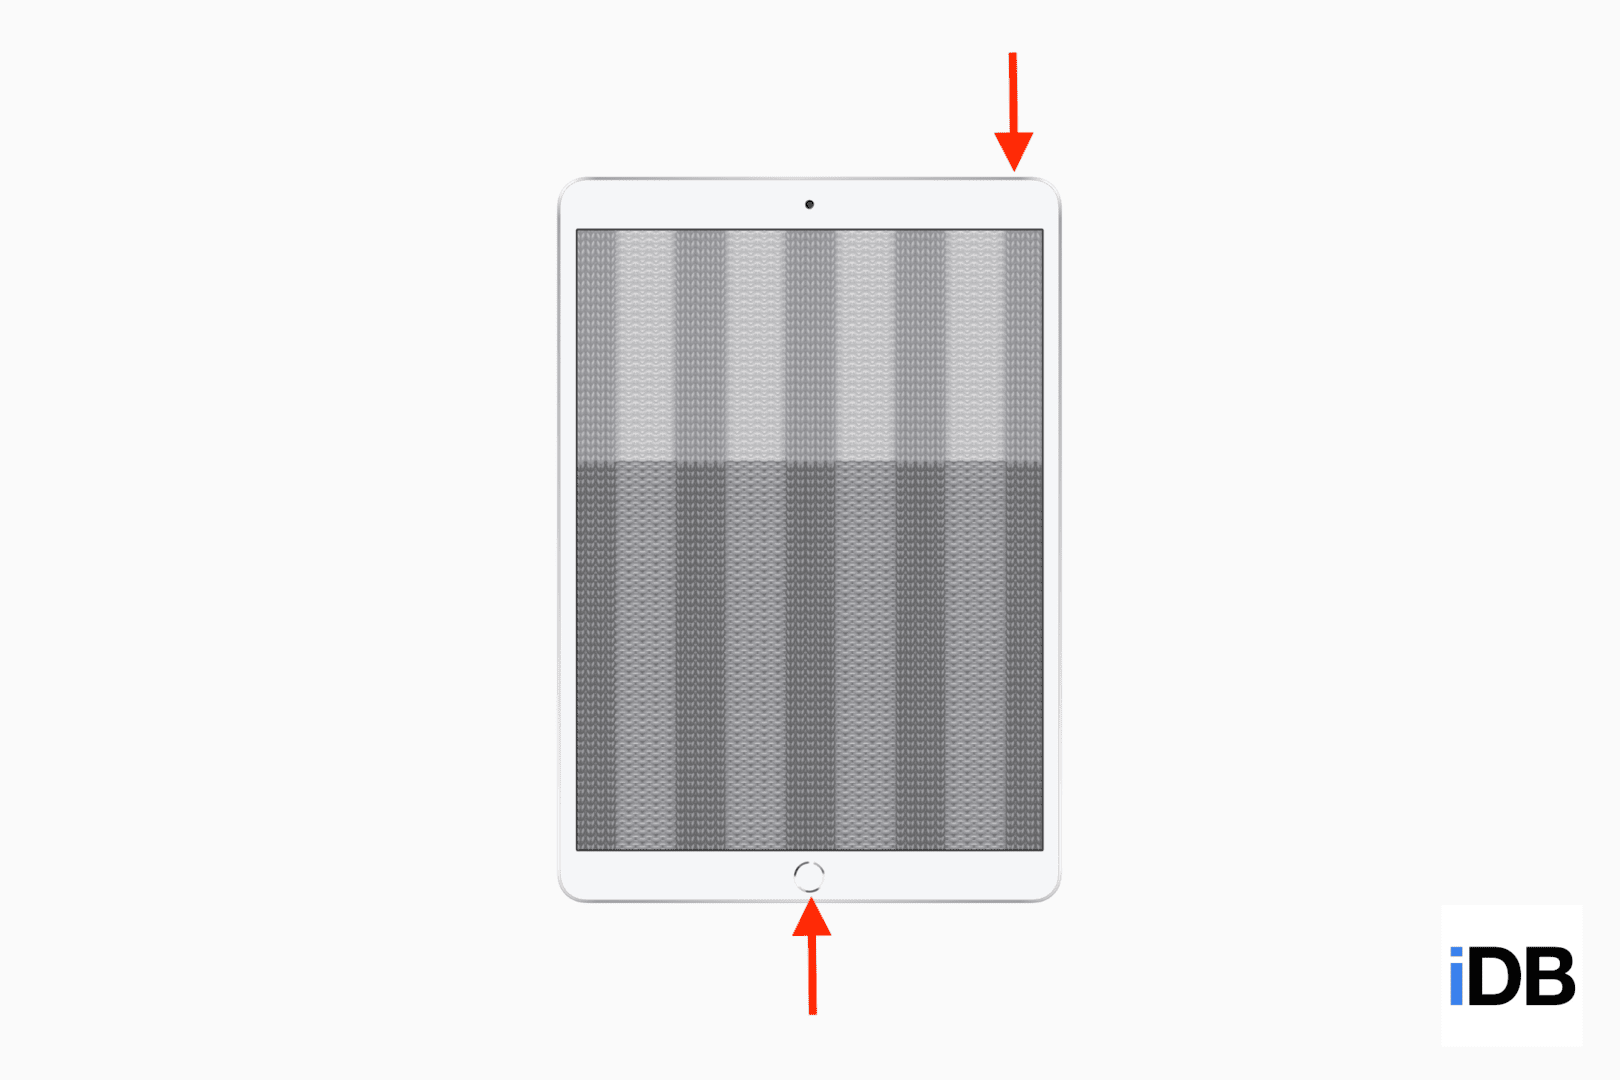 A mockup of iPad with Home button showing arrows pointing the buttons to take a screenshot